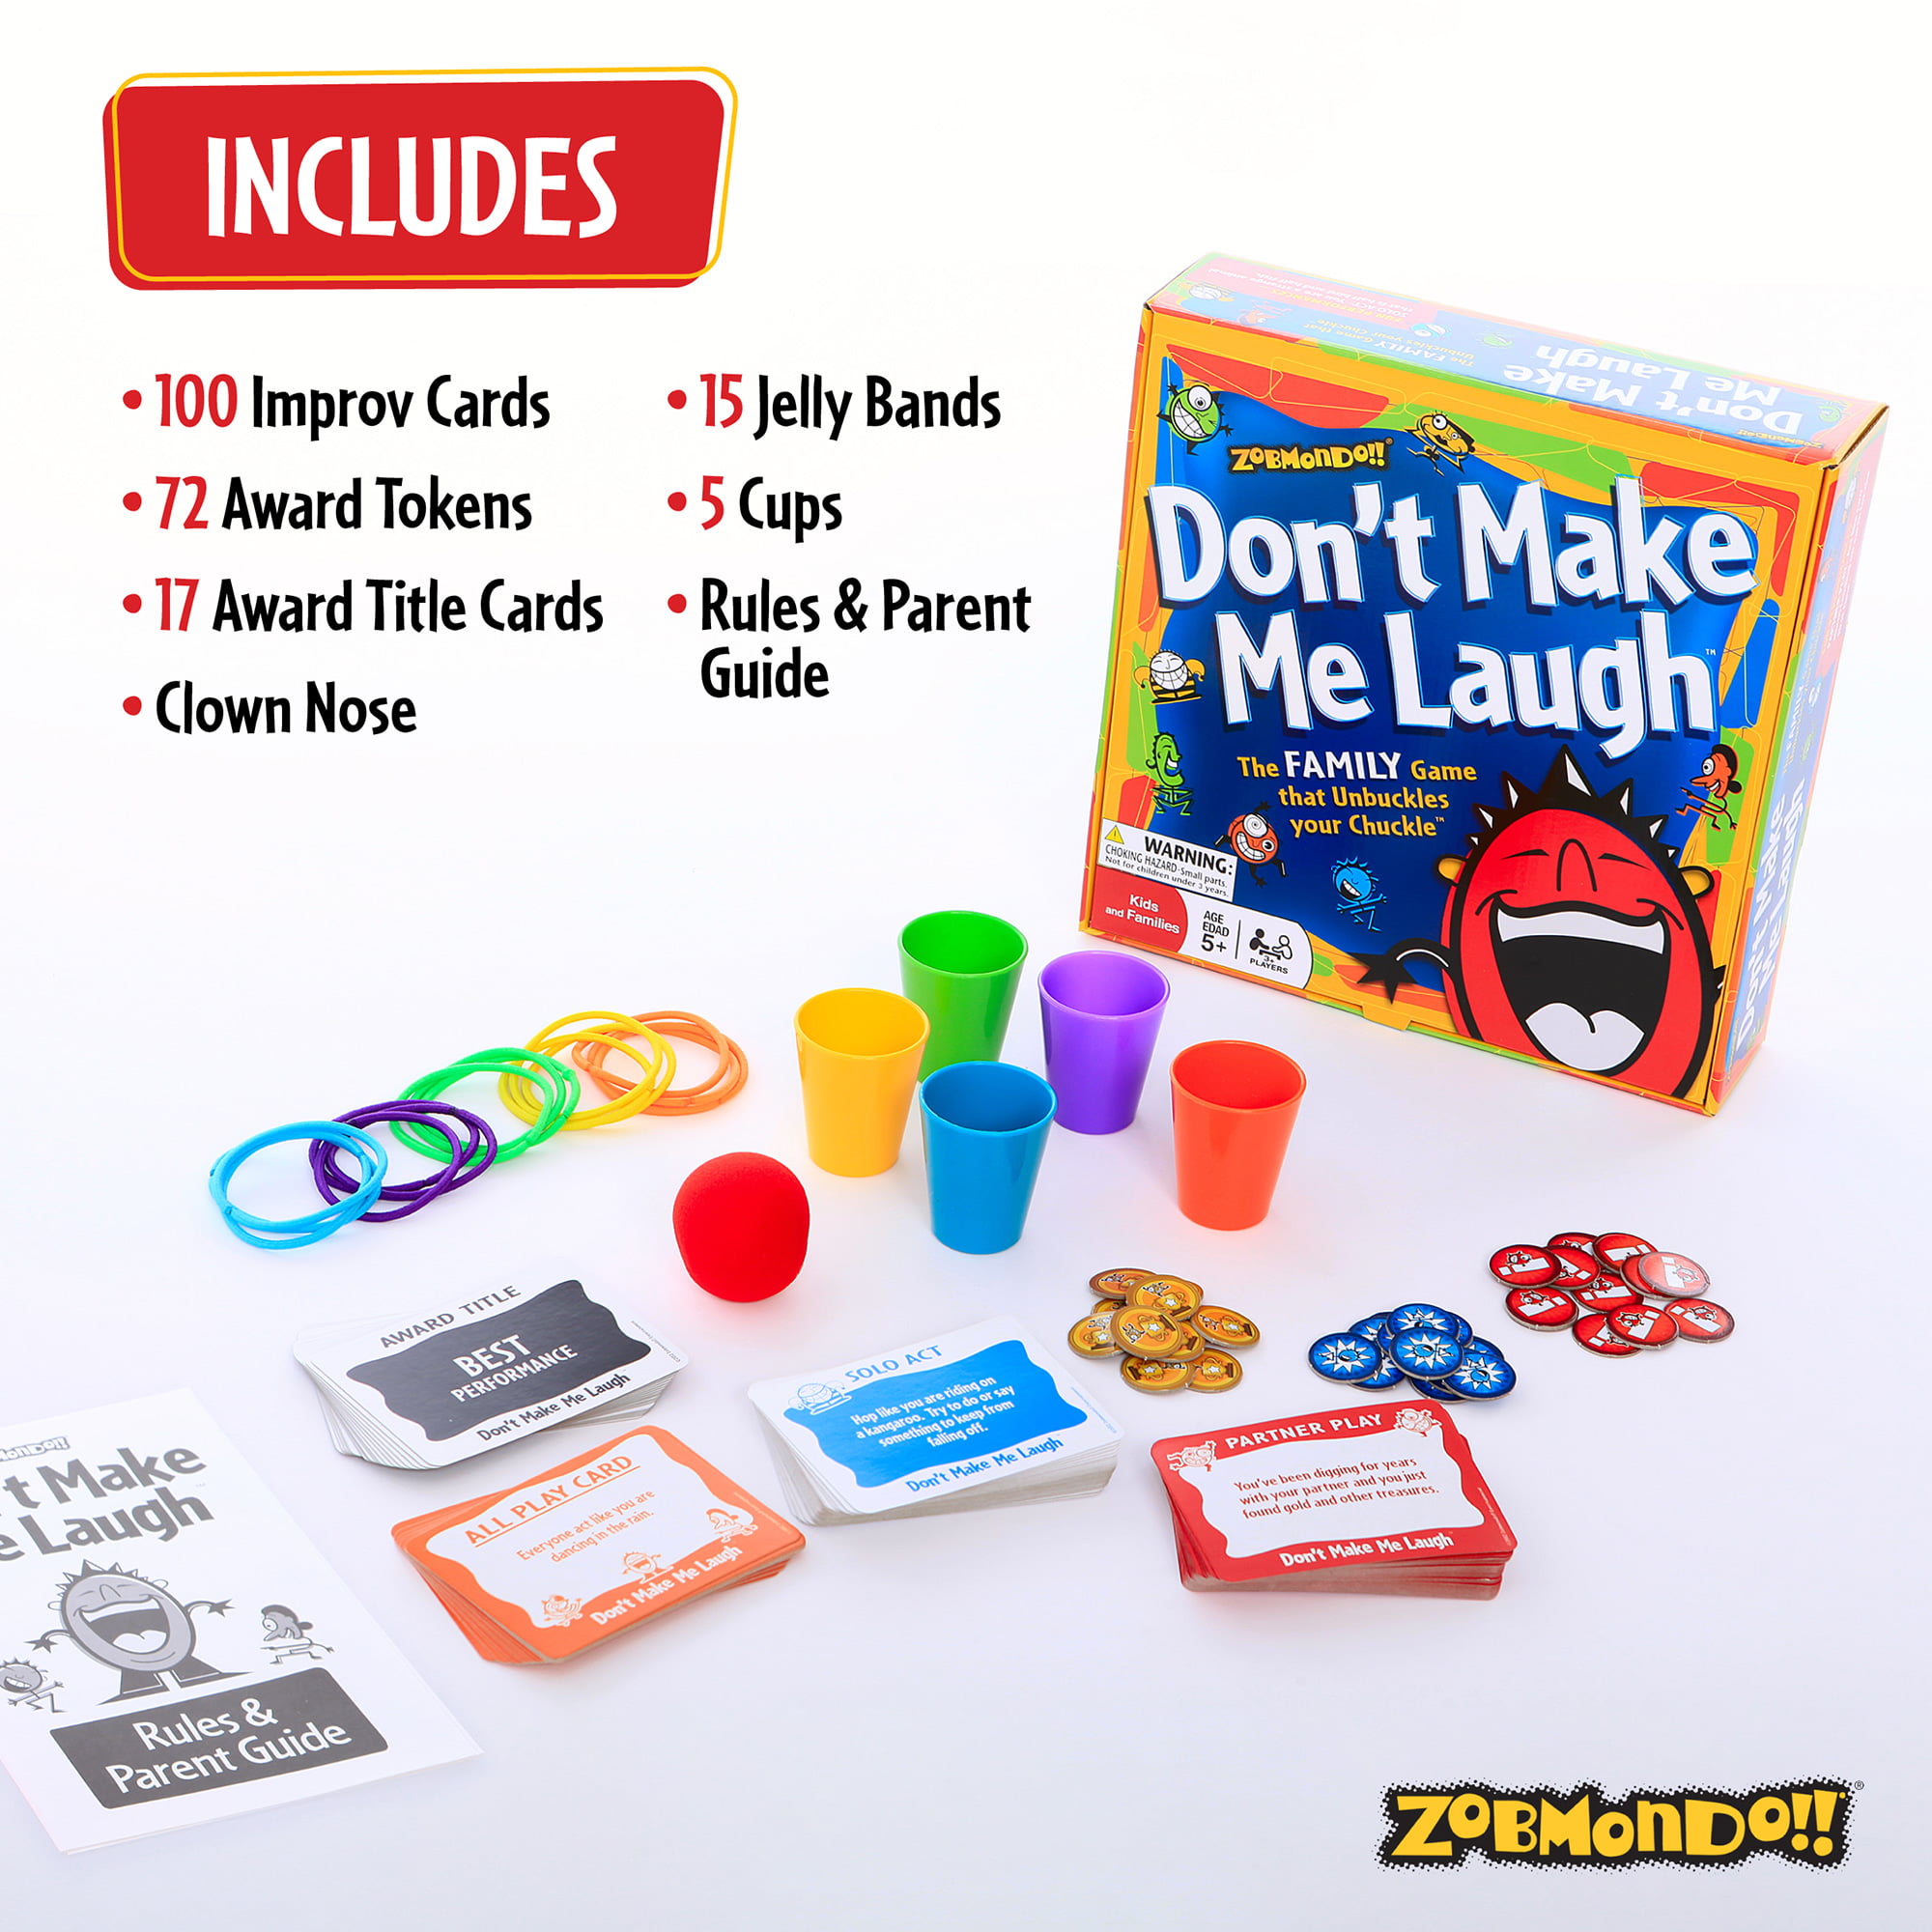 The Soggiest Game Around is sure to Make Your Children Laugh